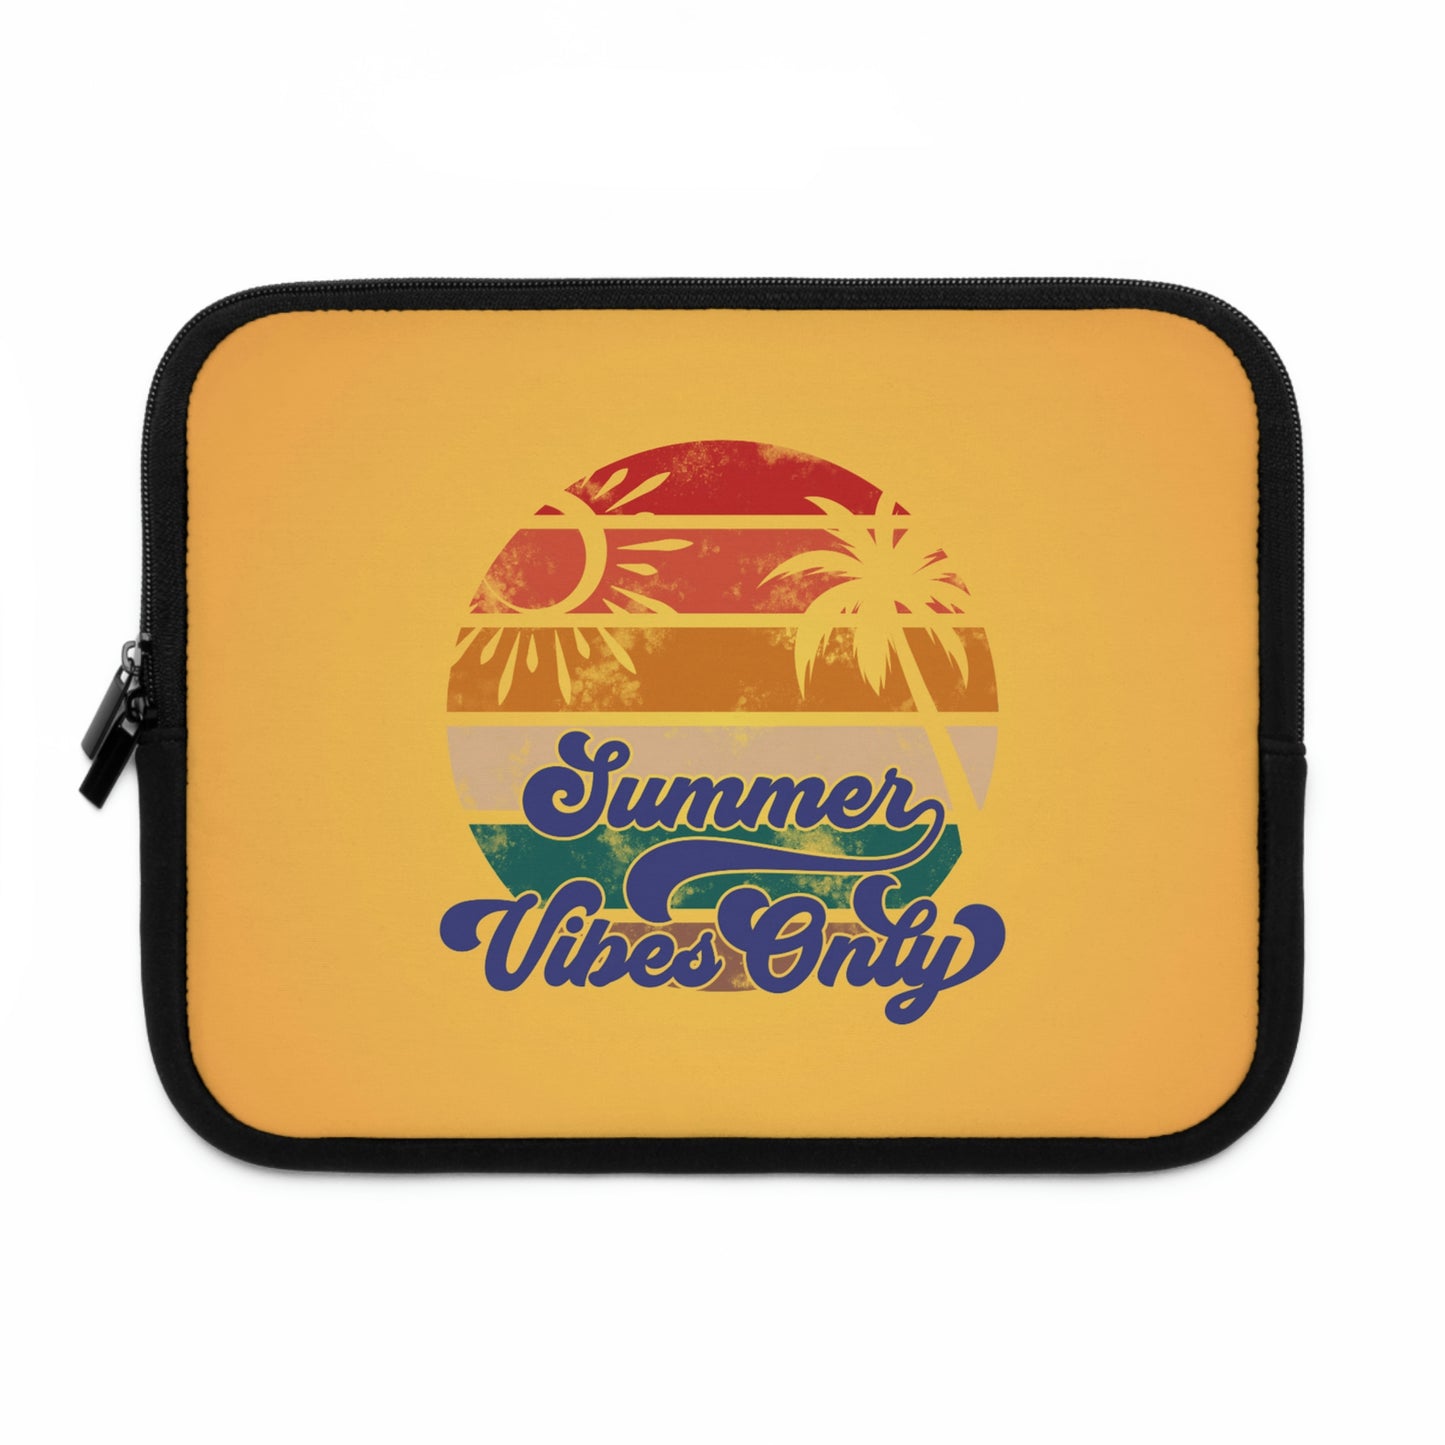 Summer Vibes Only Compact Tote Bag